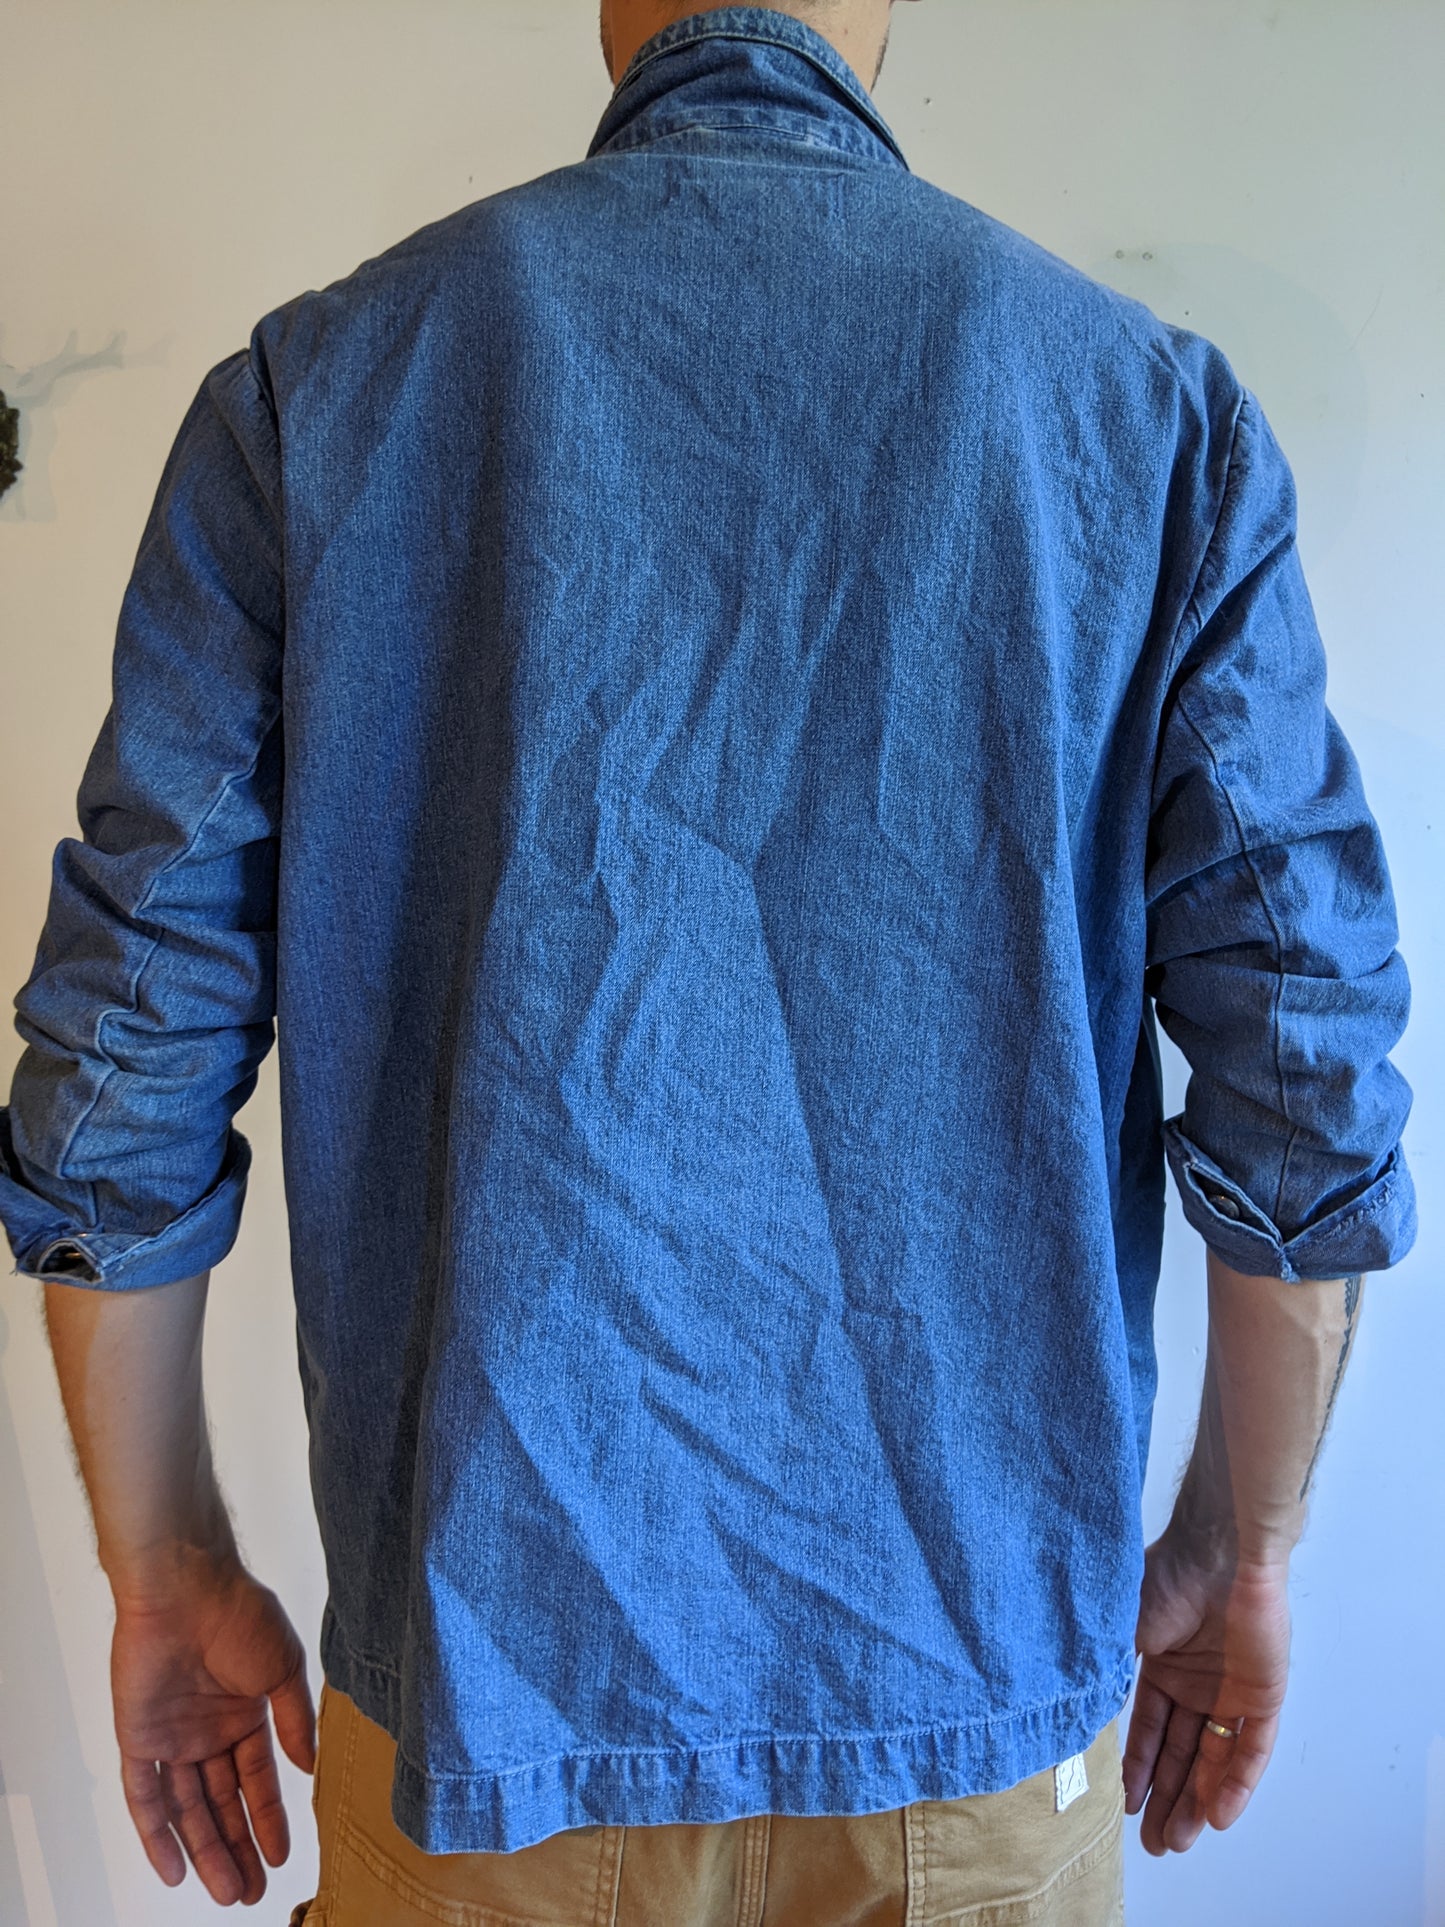 French Style Worker Jacket Shirt Blue Men Cotton